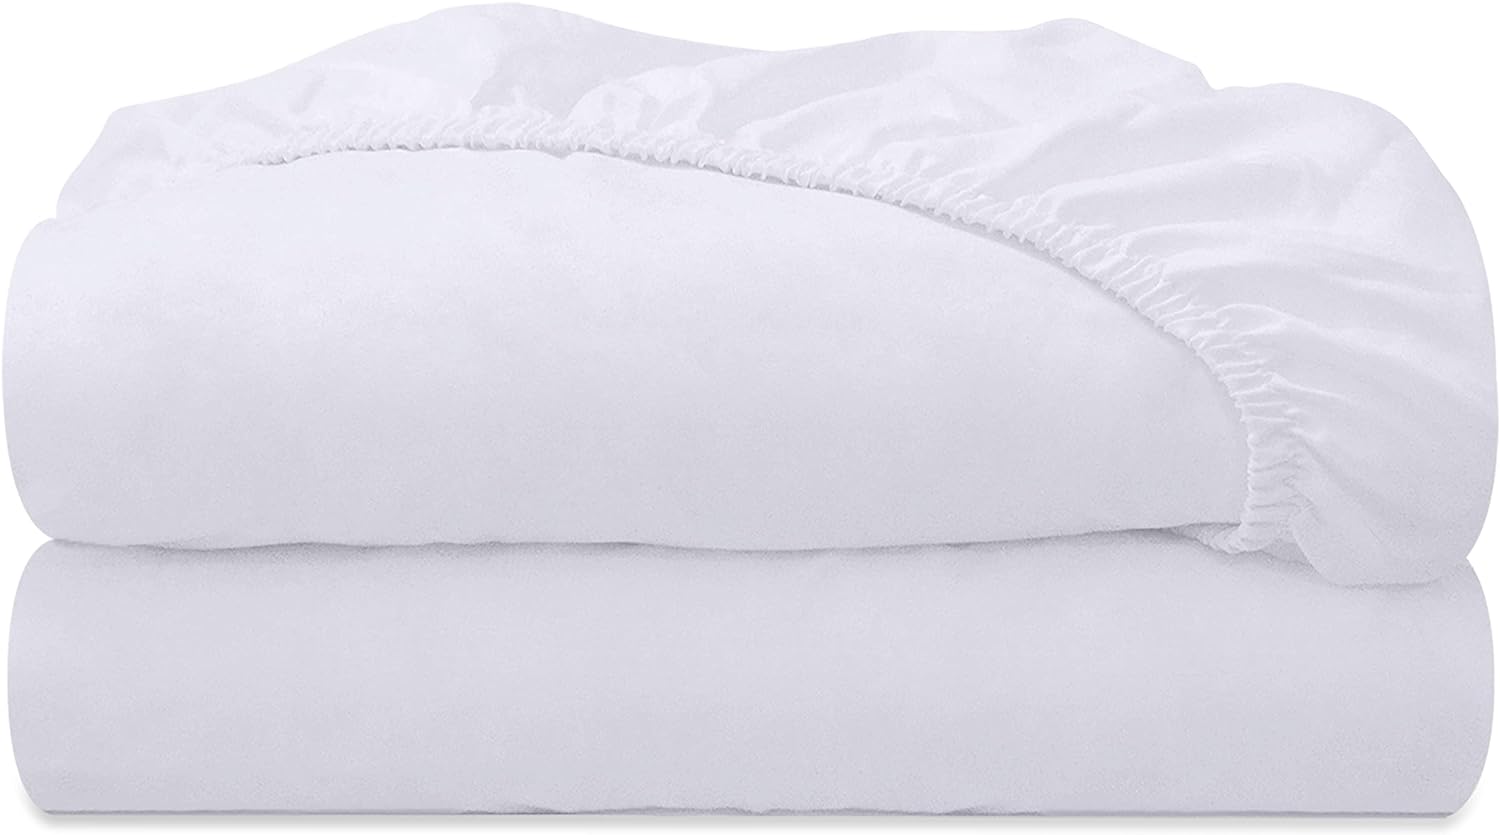 Royale Linens 2 Pack Queen Fitted Sheet Set - Bottom Sheet - Ultra Soft & Breathable - Brushed 1800 Microfiber - Wrinkle &Stain Resistant - Hotel Quality Deep Pocket Stretches Upto 16" (Queen, White)